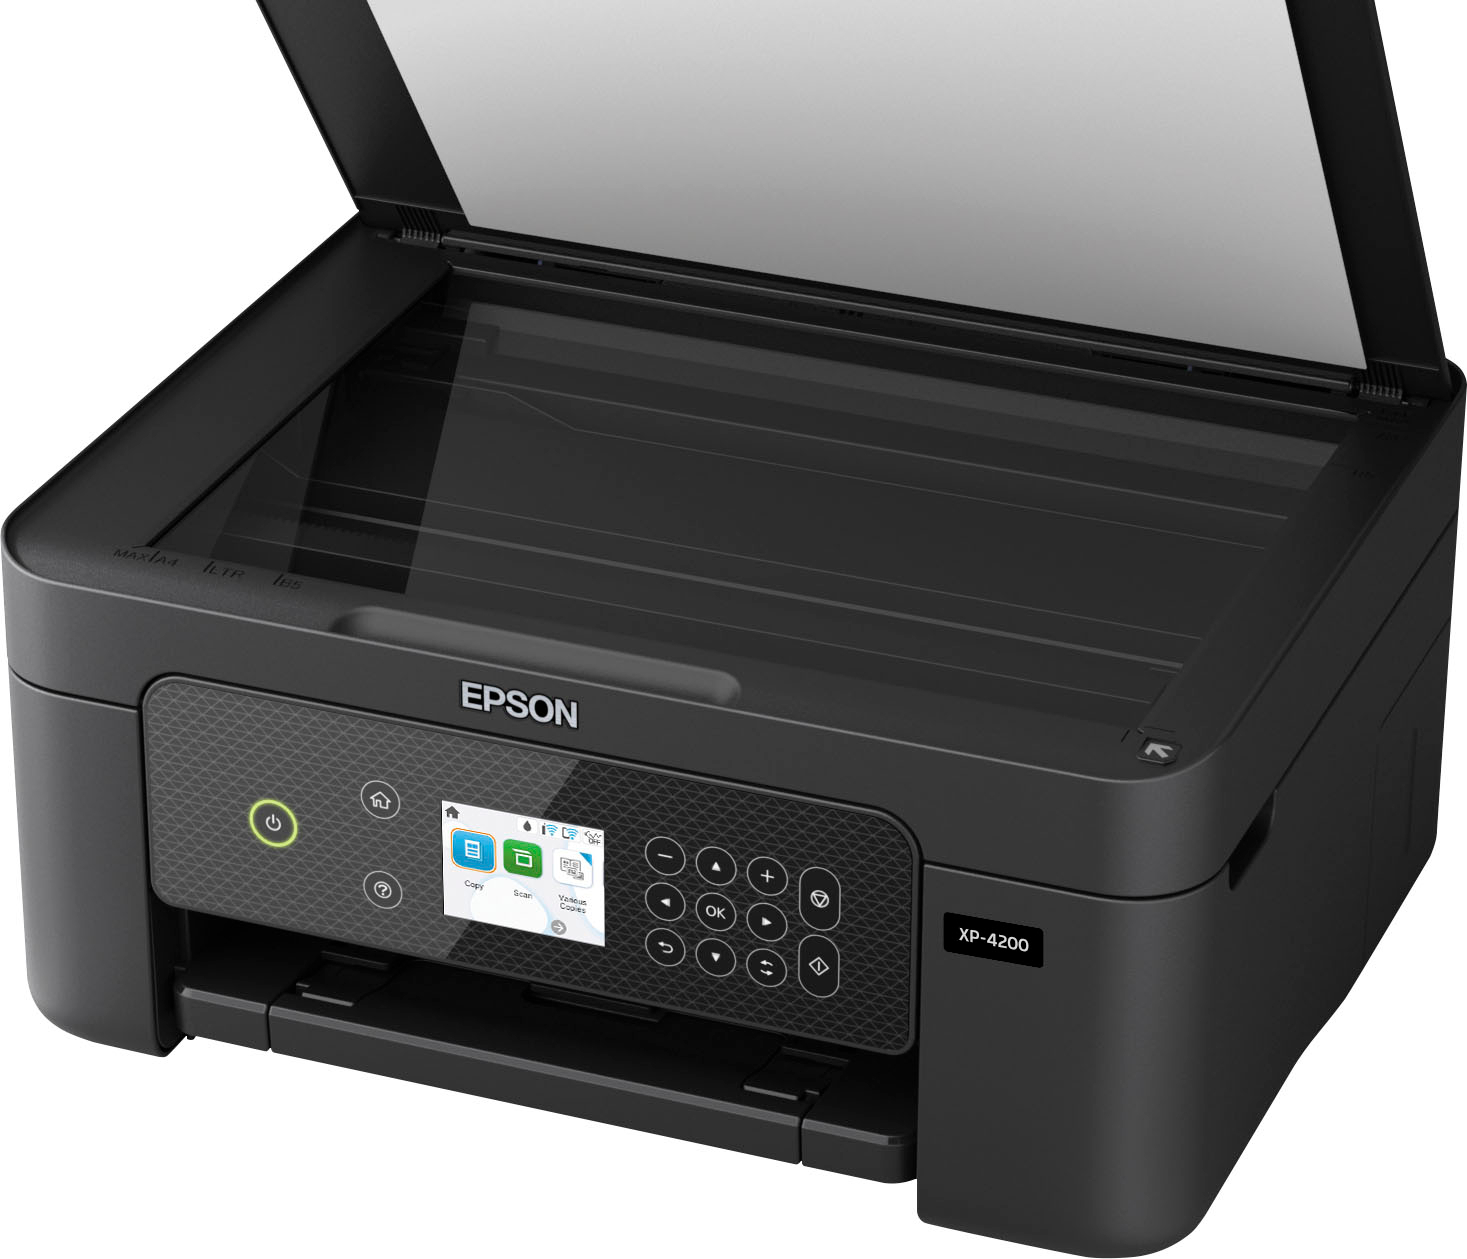 Epson XP 4200 Ink Cartridge Replacement. 